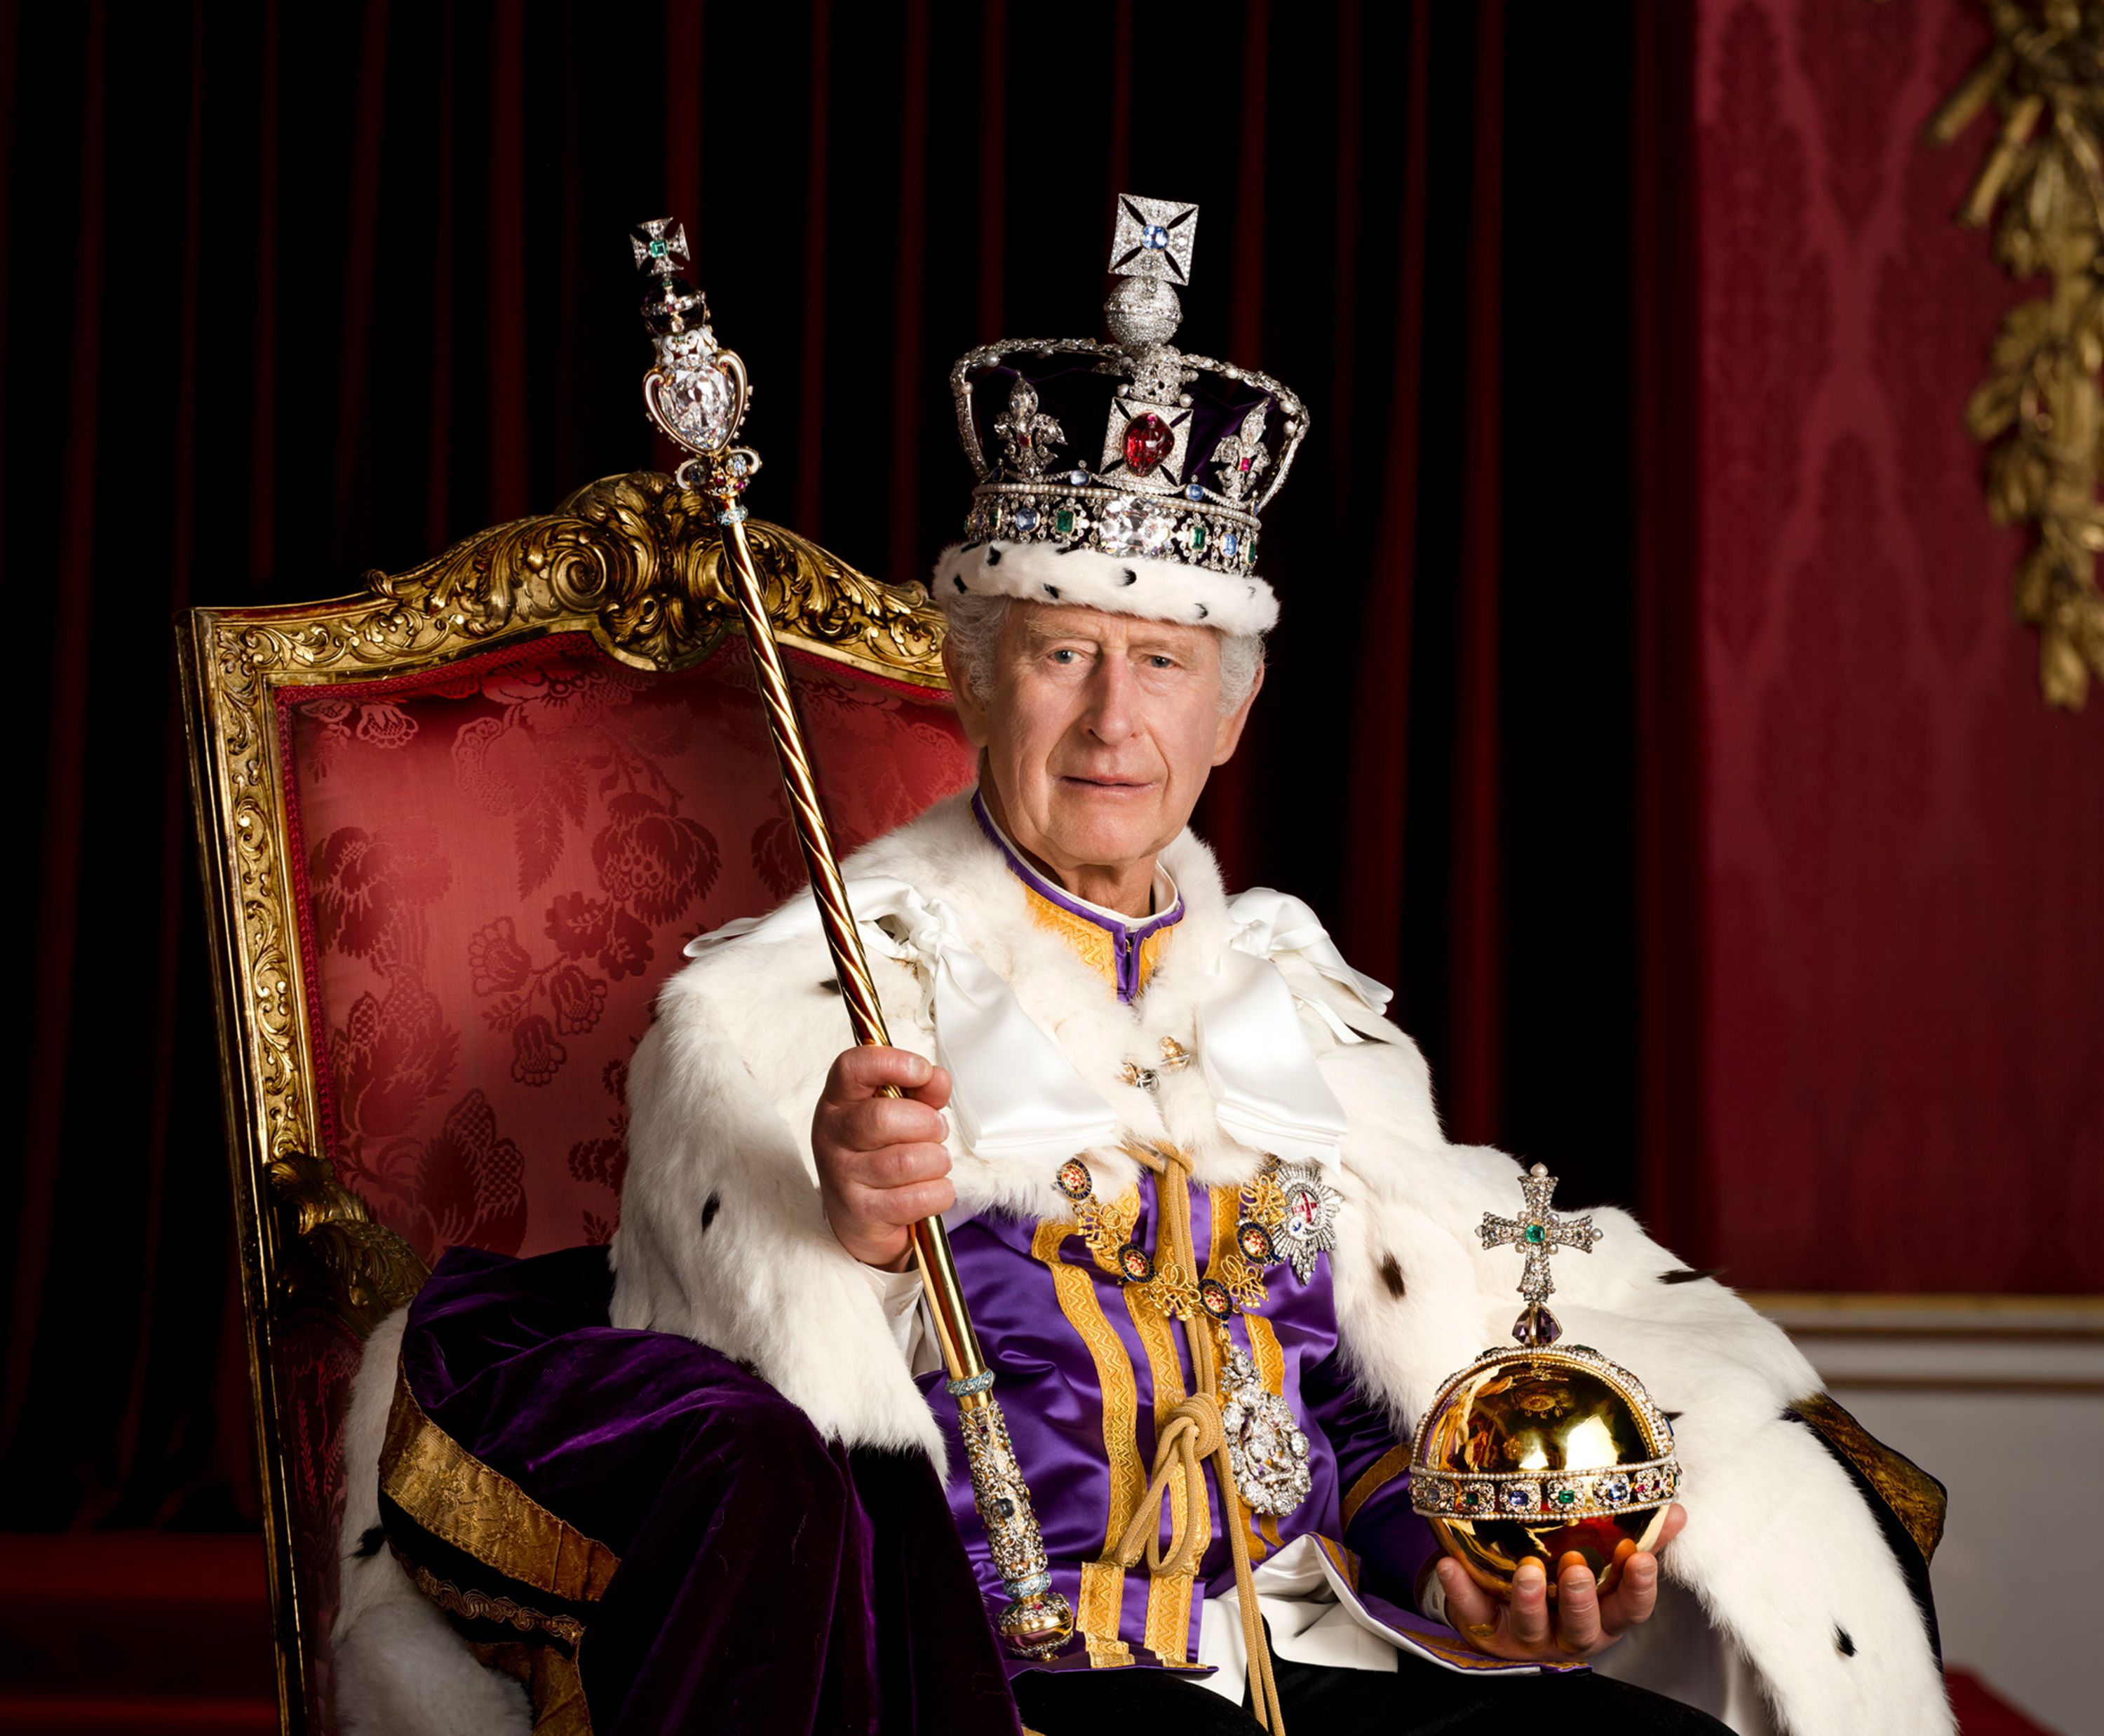 Britain's King Charles III <a href="https://www.cnn.com/2023/05/08/uk/coronation-official-portraits-intl-gbr-ckc/index.html" target="_blank">poses for a portrait</a> in Buckingham Palace's Throne Room after his official coronation in May 2023.